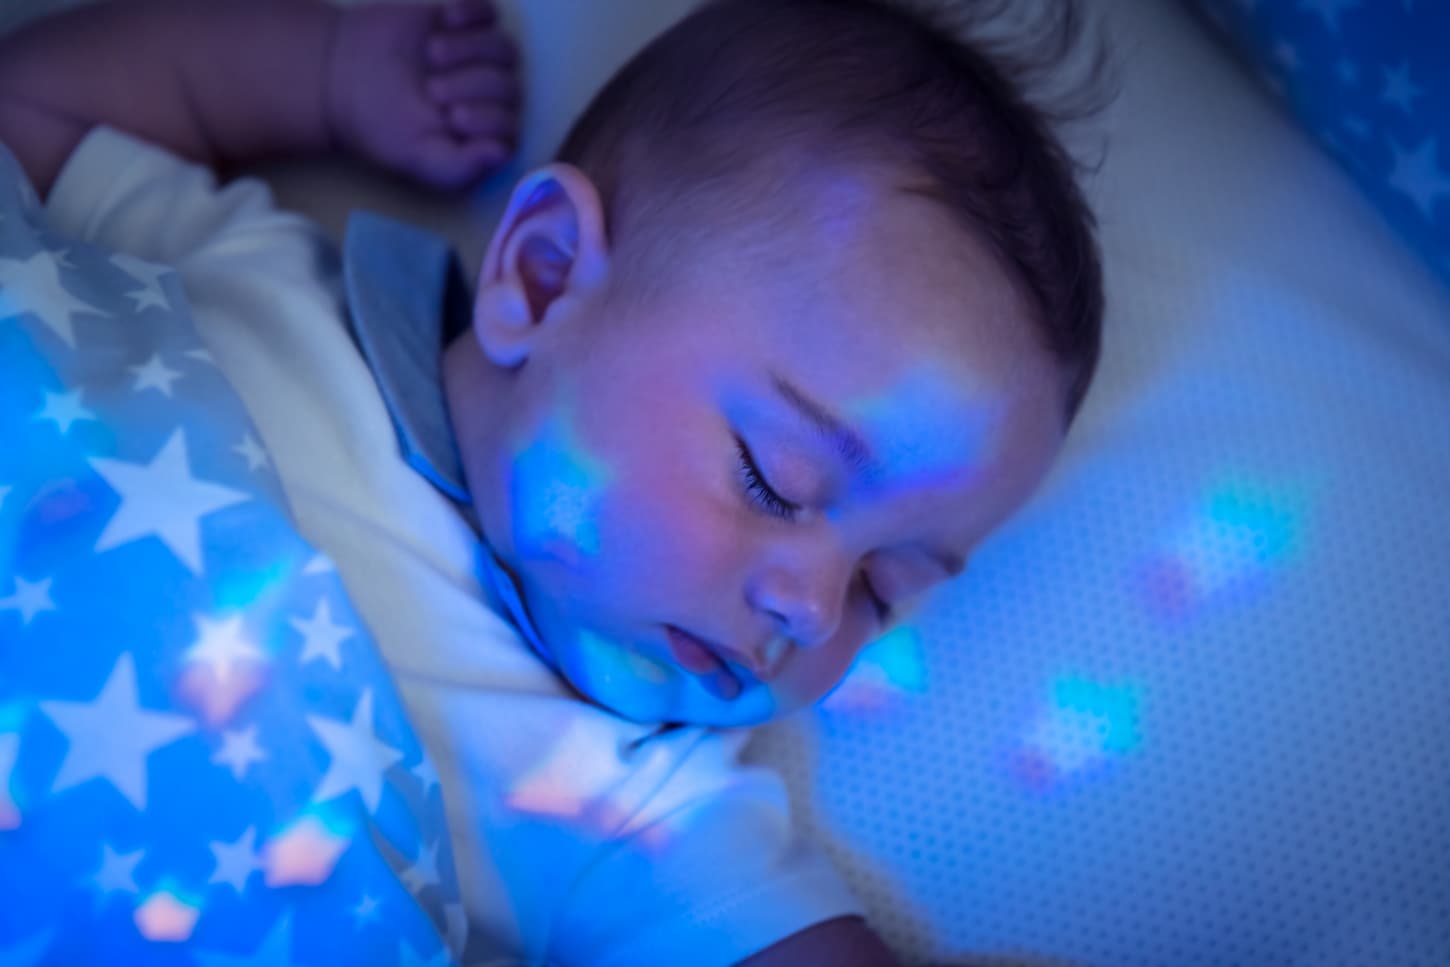 An image of a baby boy sleeping in his bed with star-shaped night lights in the whole room.